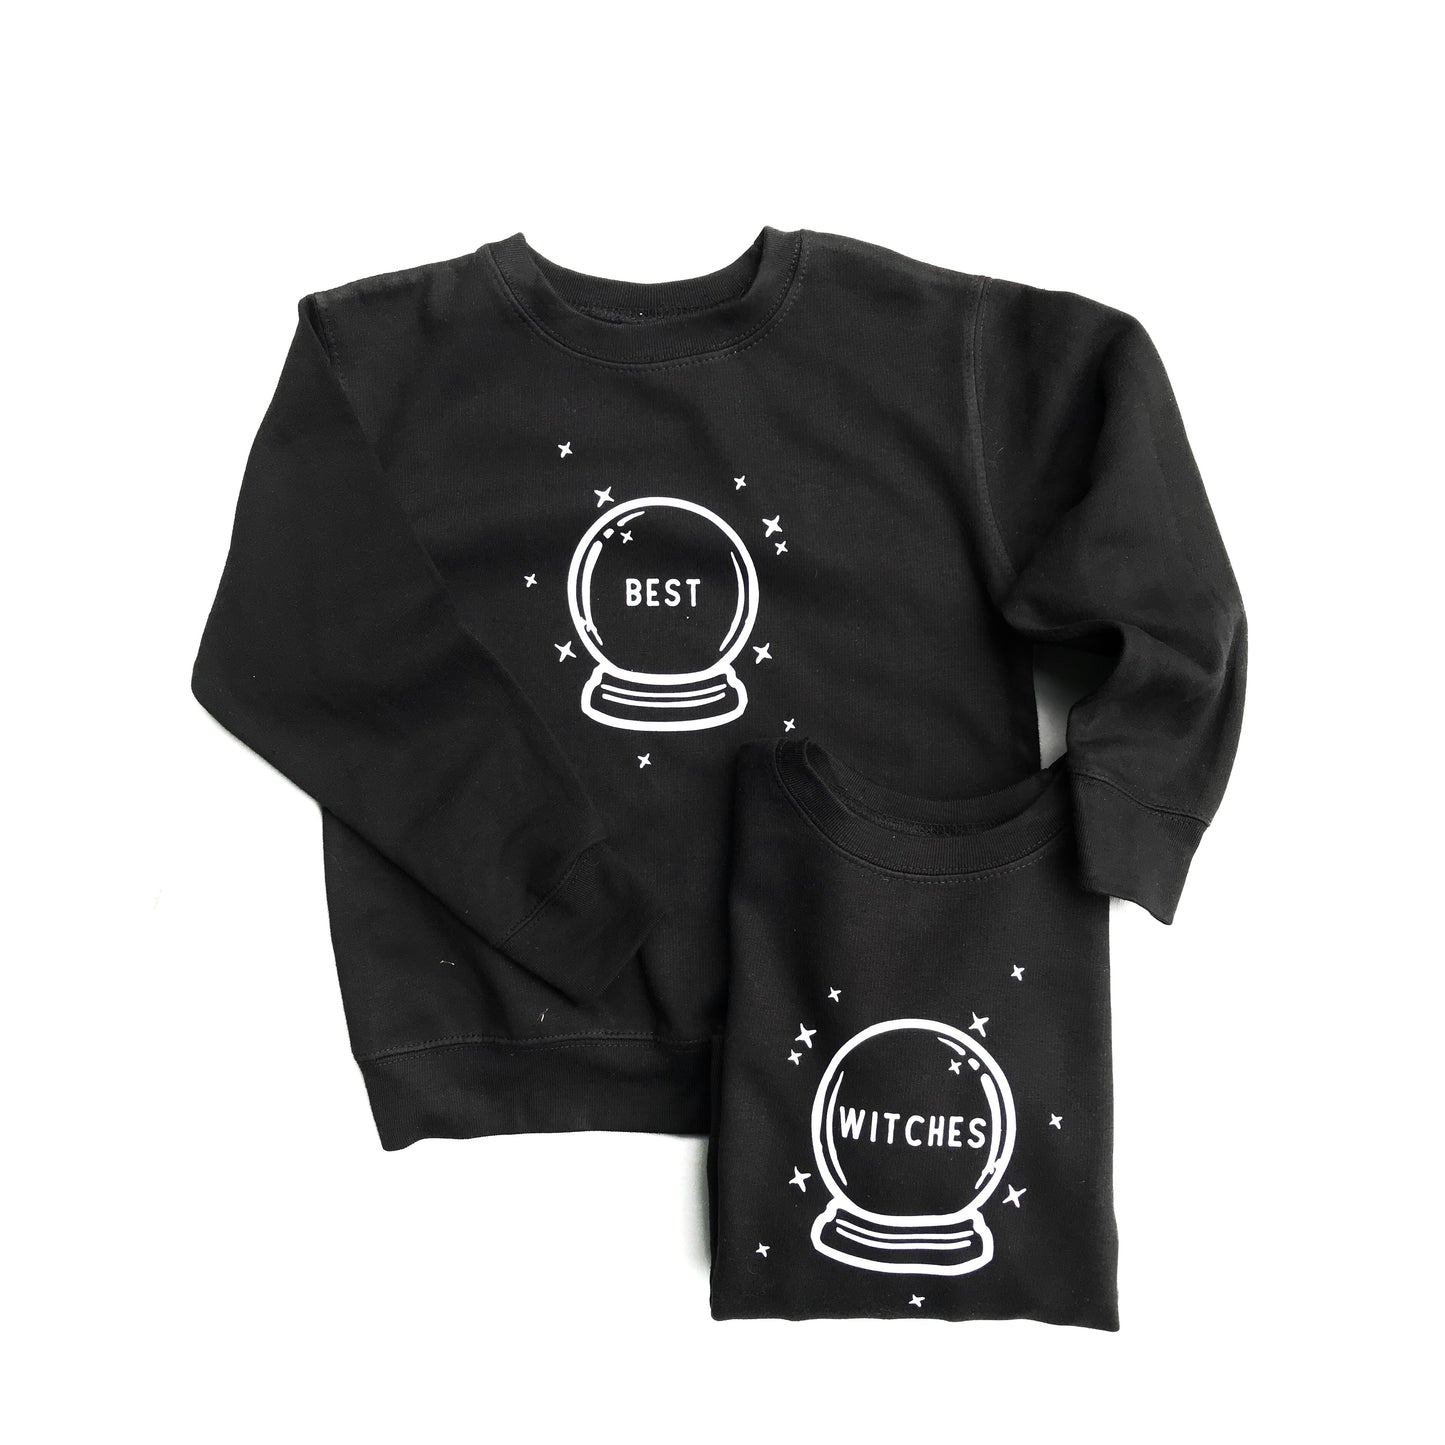 the wishing elephant pullovers sweatshirts kids clothes screen printed tee shirts gifts birthday